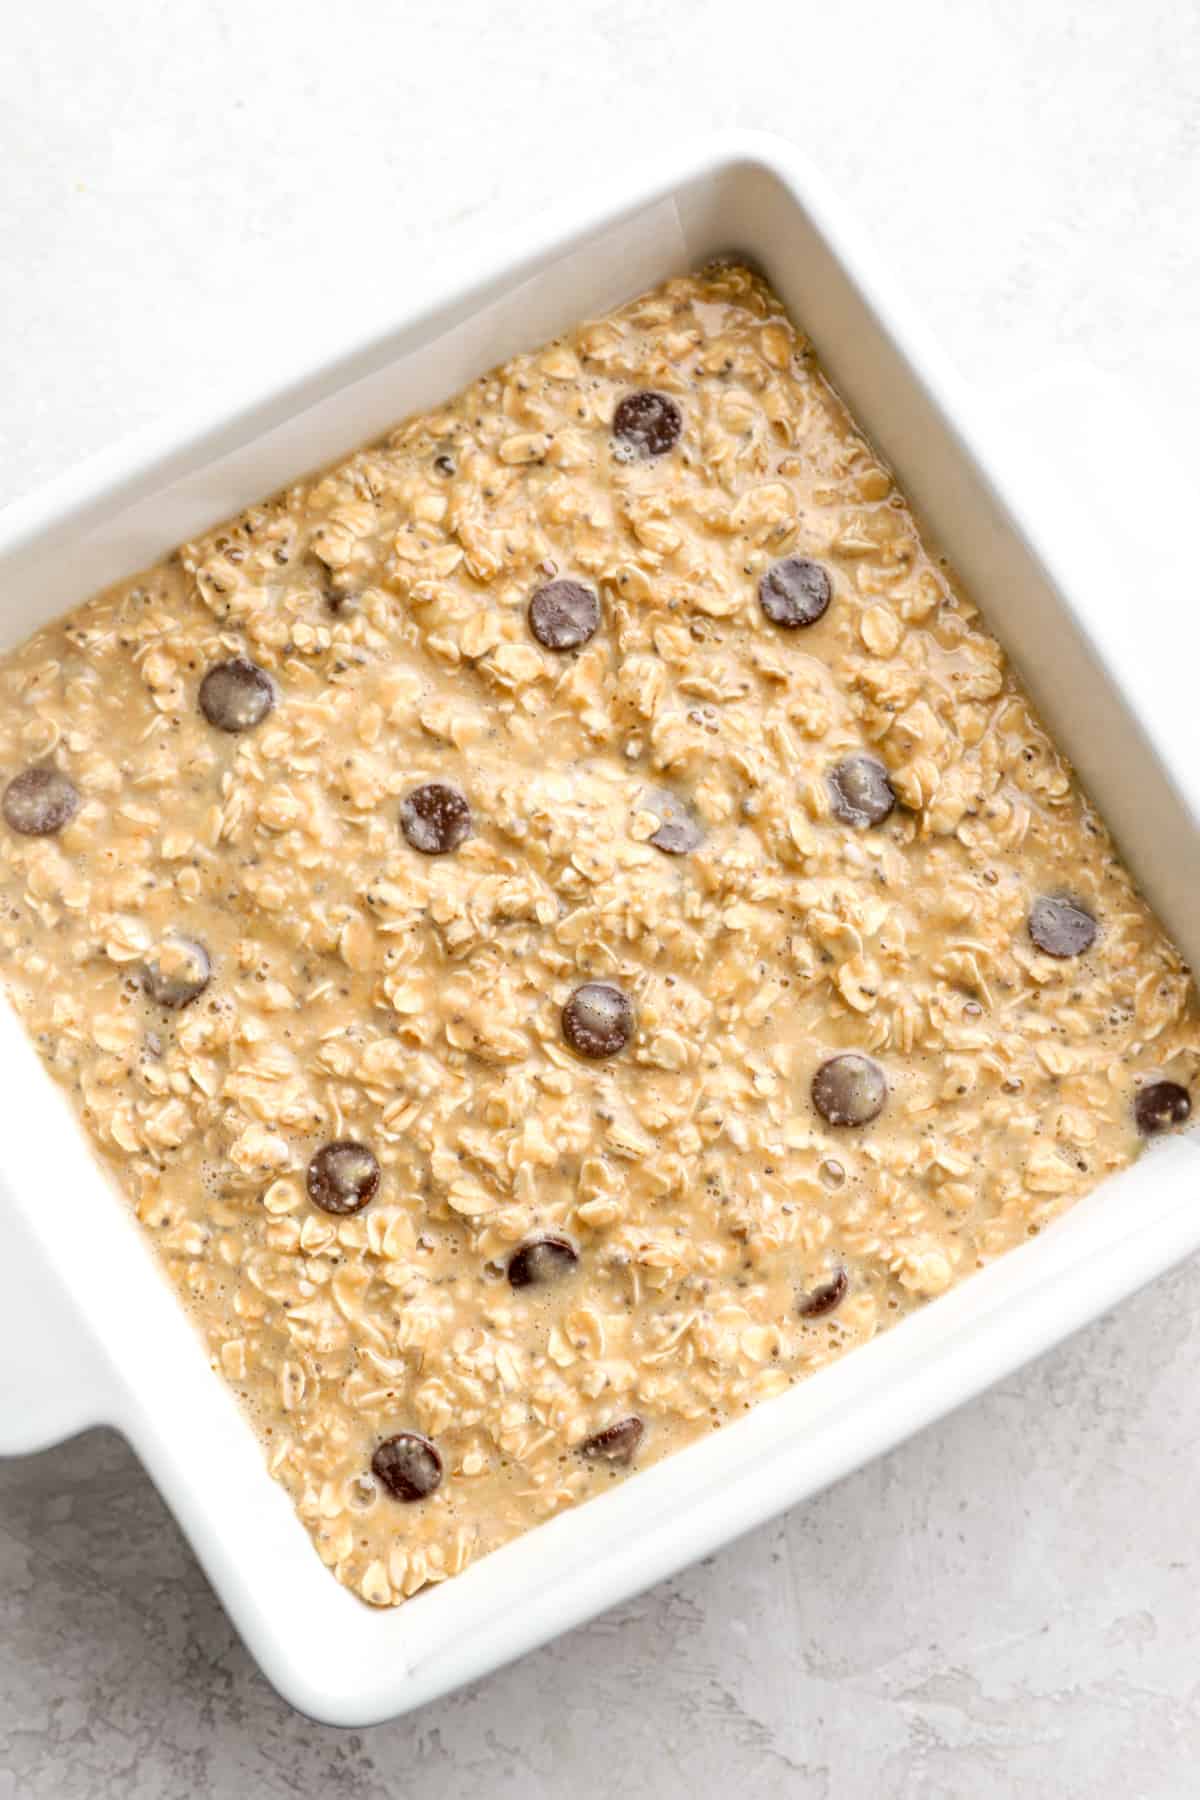 unbaked oatmeal in a baking dish.